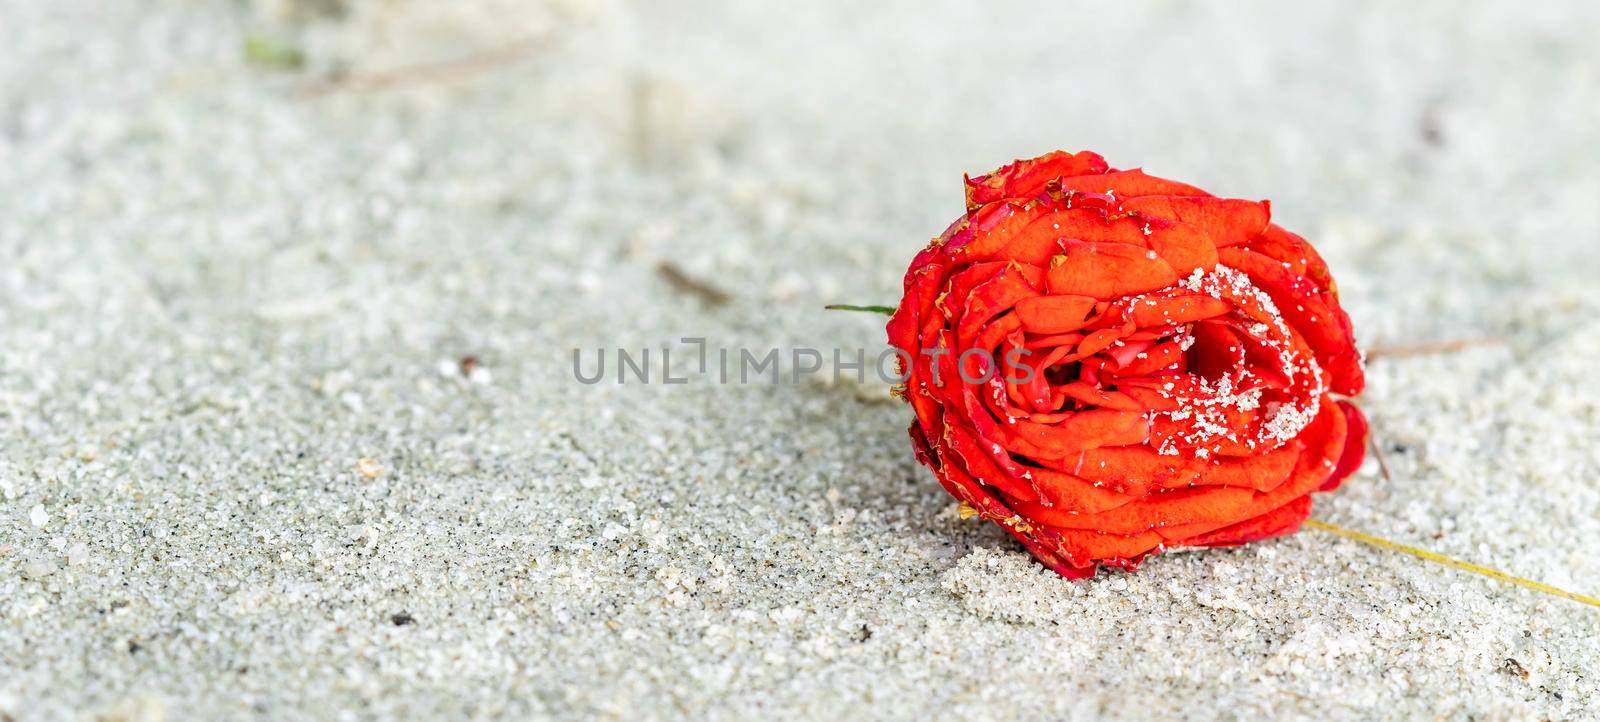 Red rose on the beach with the sand. Macro shot of red rose on beach covered with sand by billroque